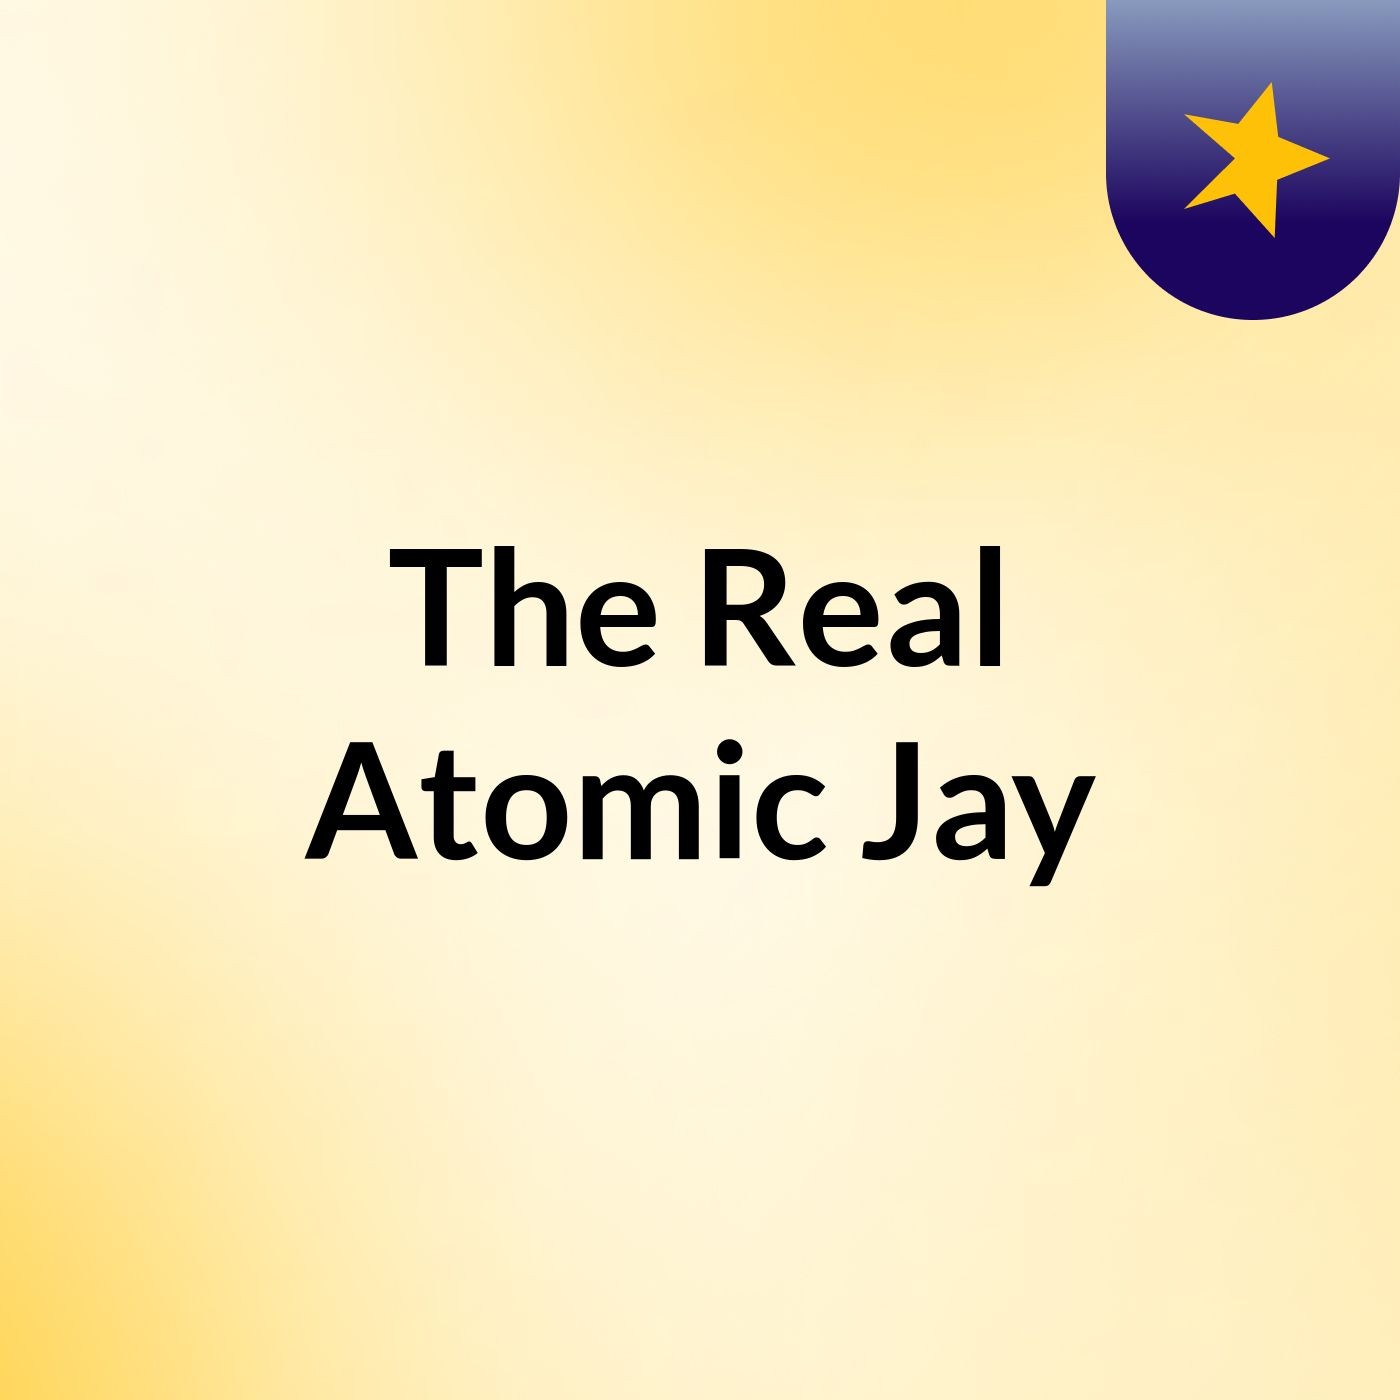 The Real Atomic Jay